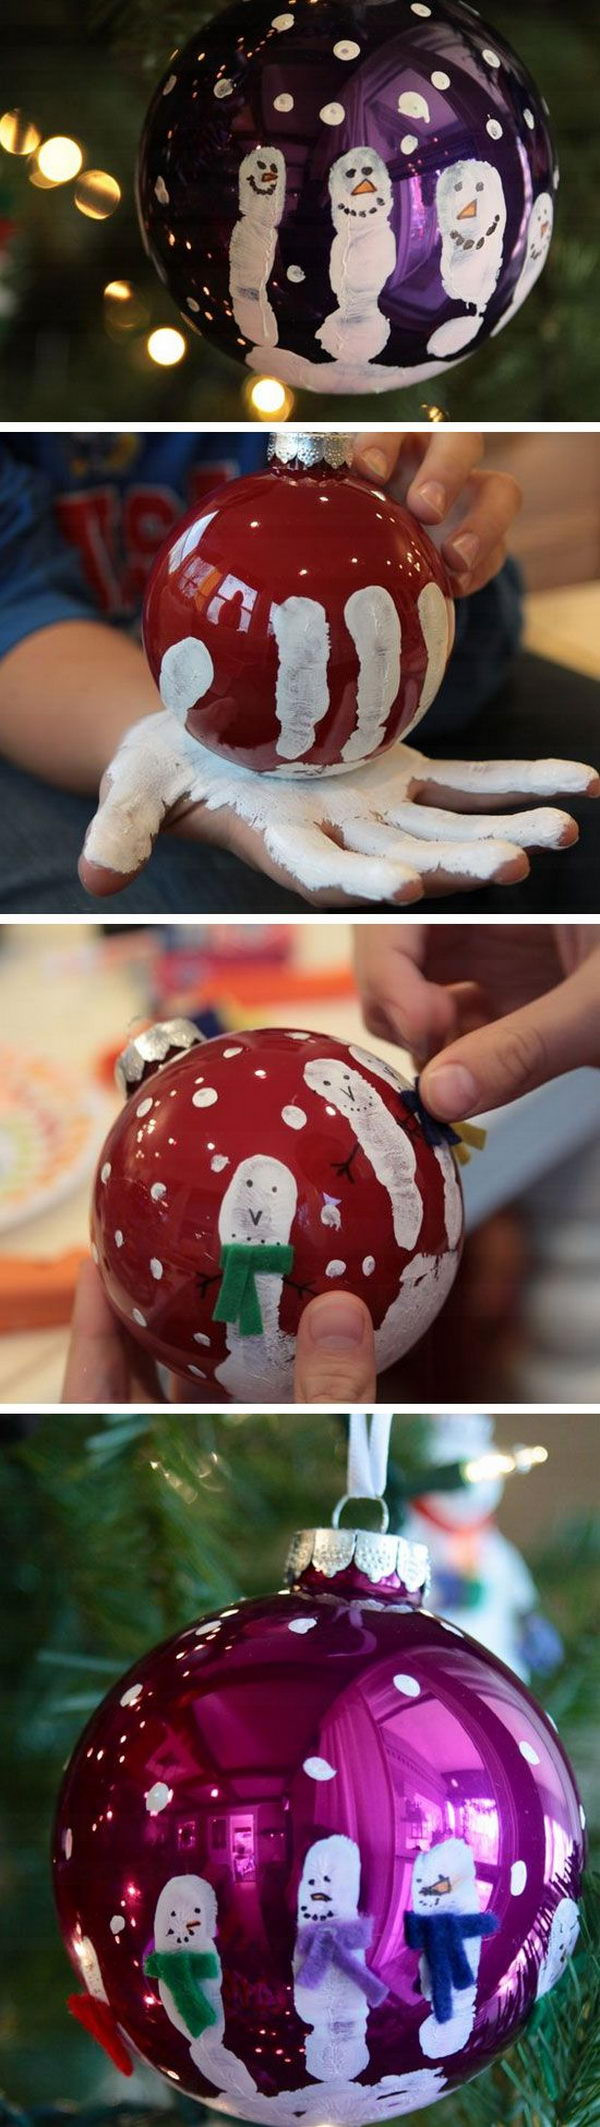 Child Craft Ideas For Christmas
 Easy & Creative Christmas DIY Projects That Kids Can Do